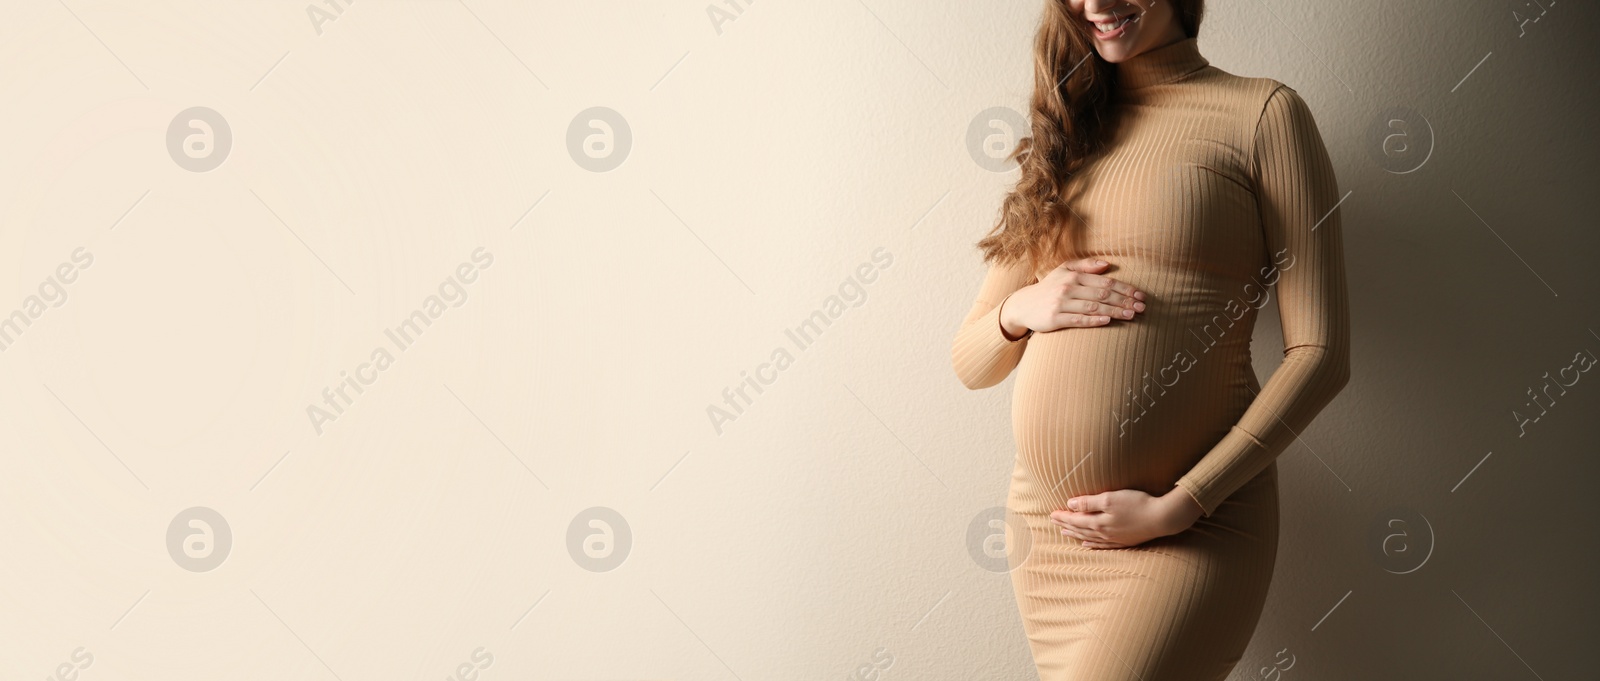 Image of Pregnant woman touching her belly on beige background, space for text. Banner design